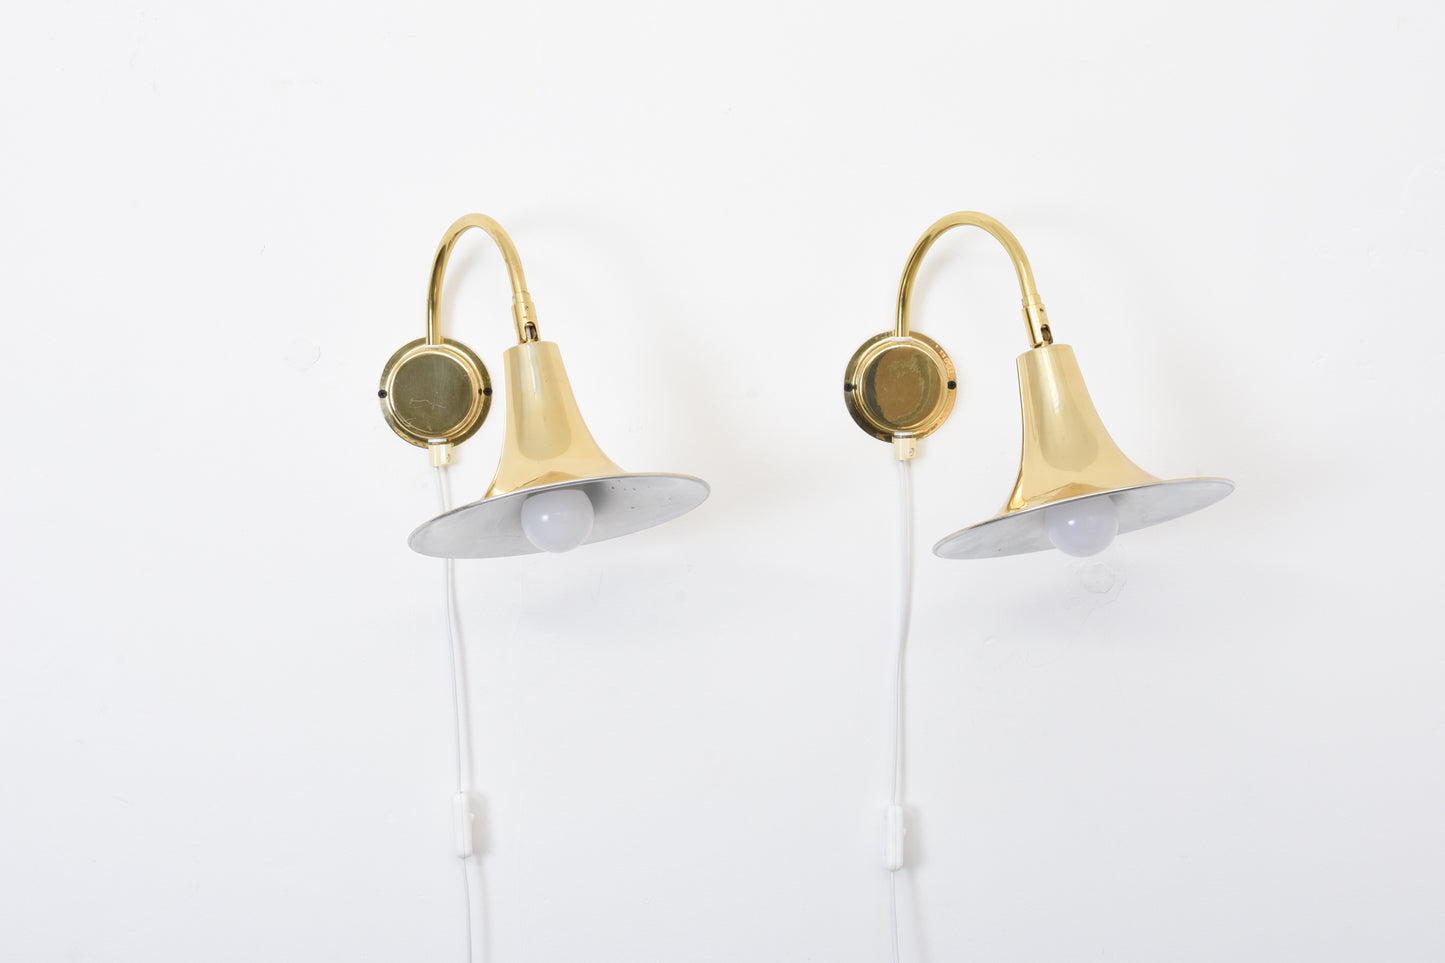 Two available: 1970s brass wall lights by Börje Claes